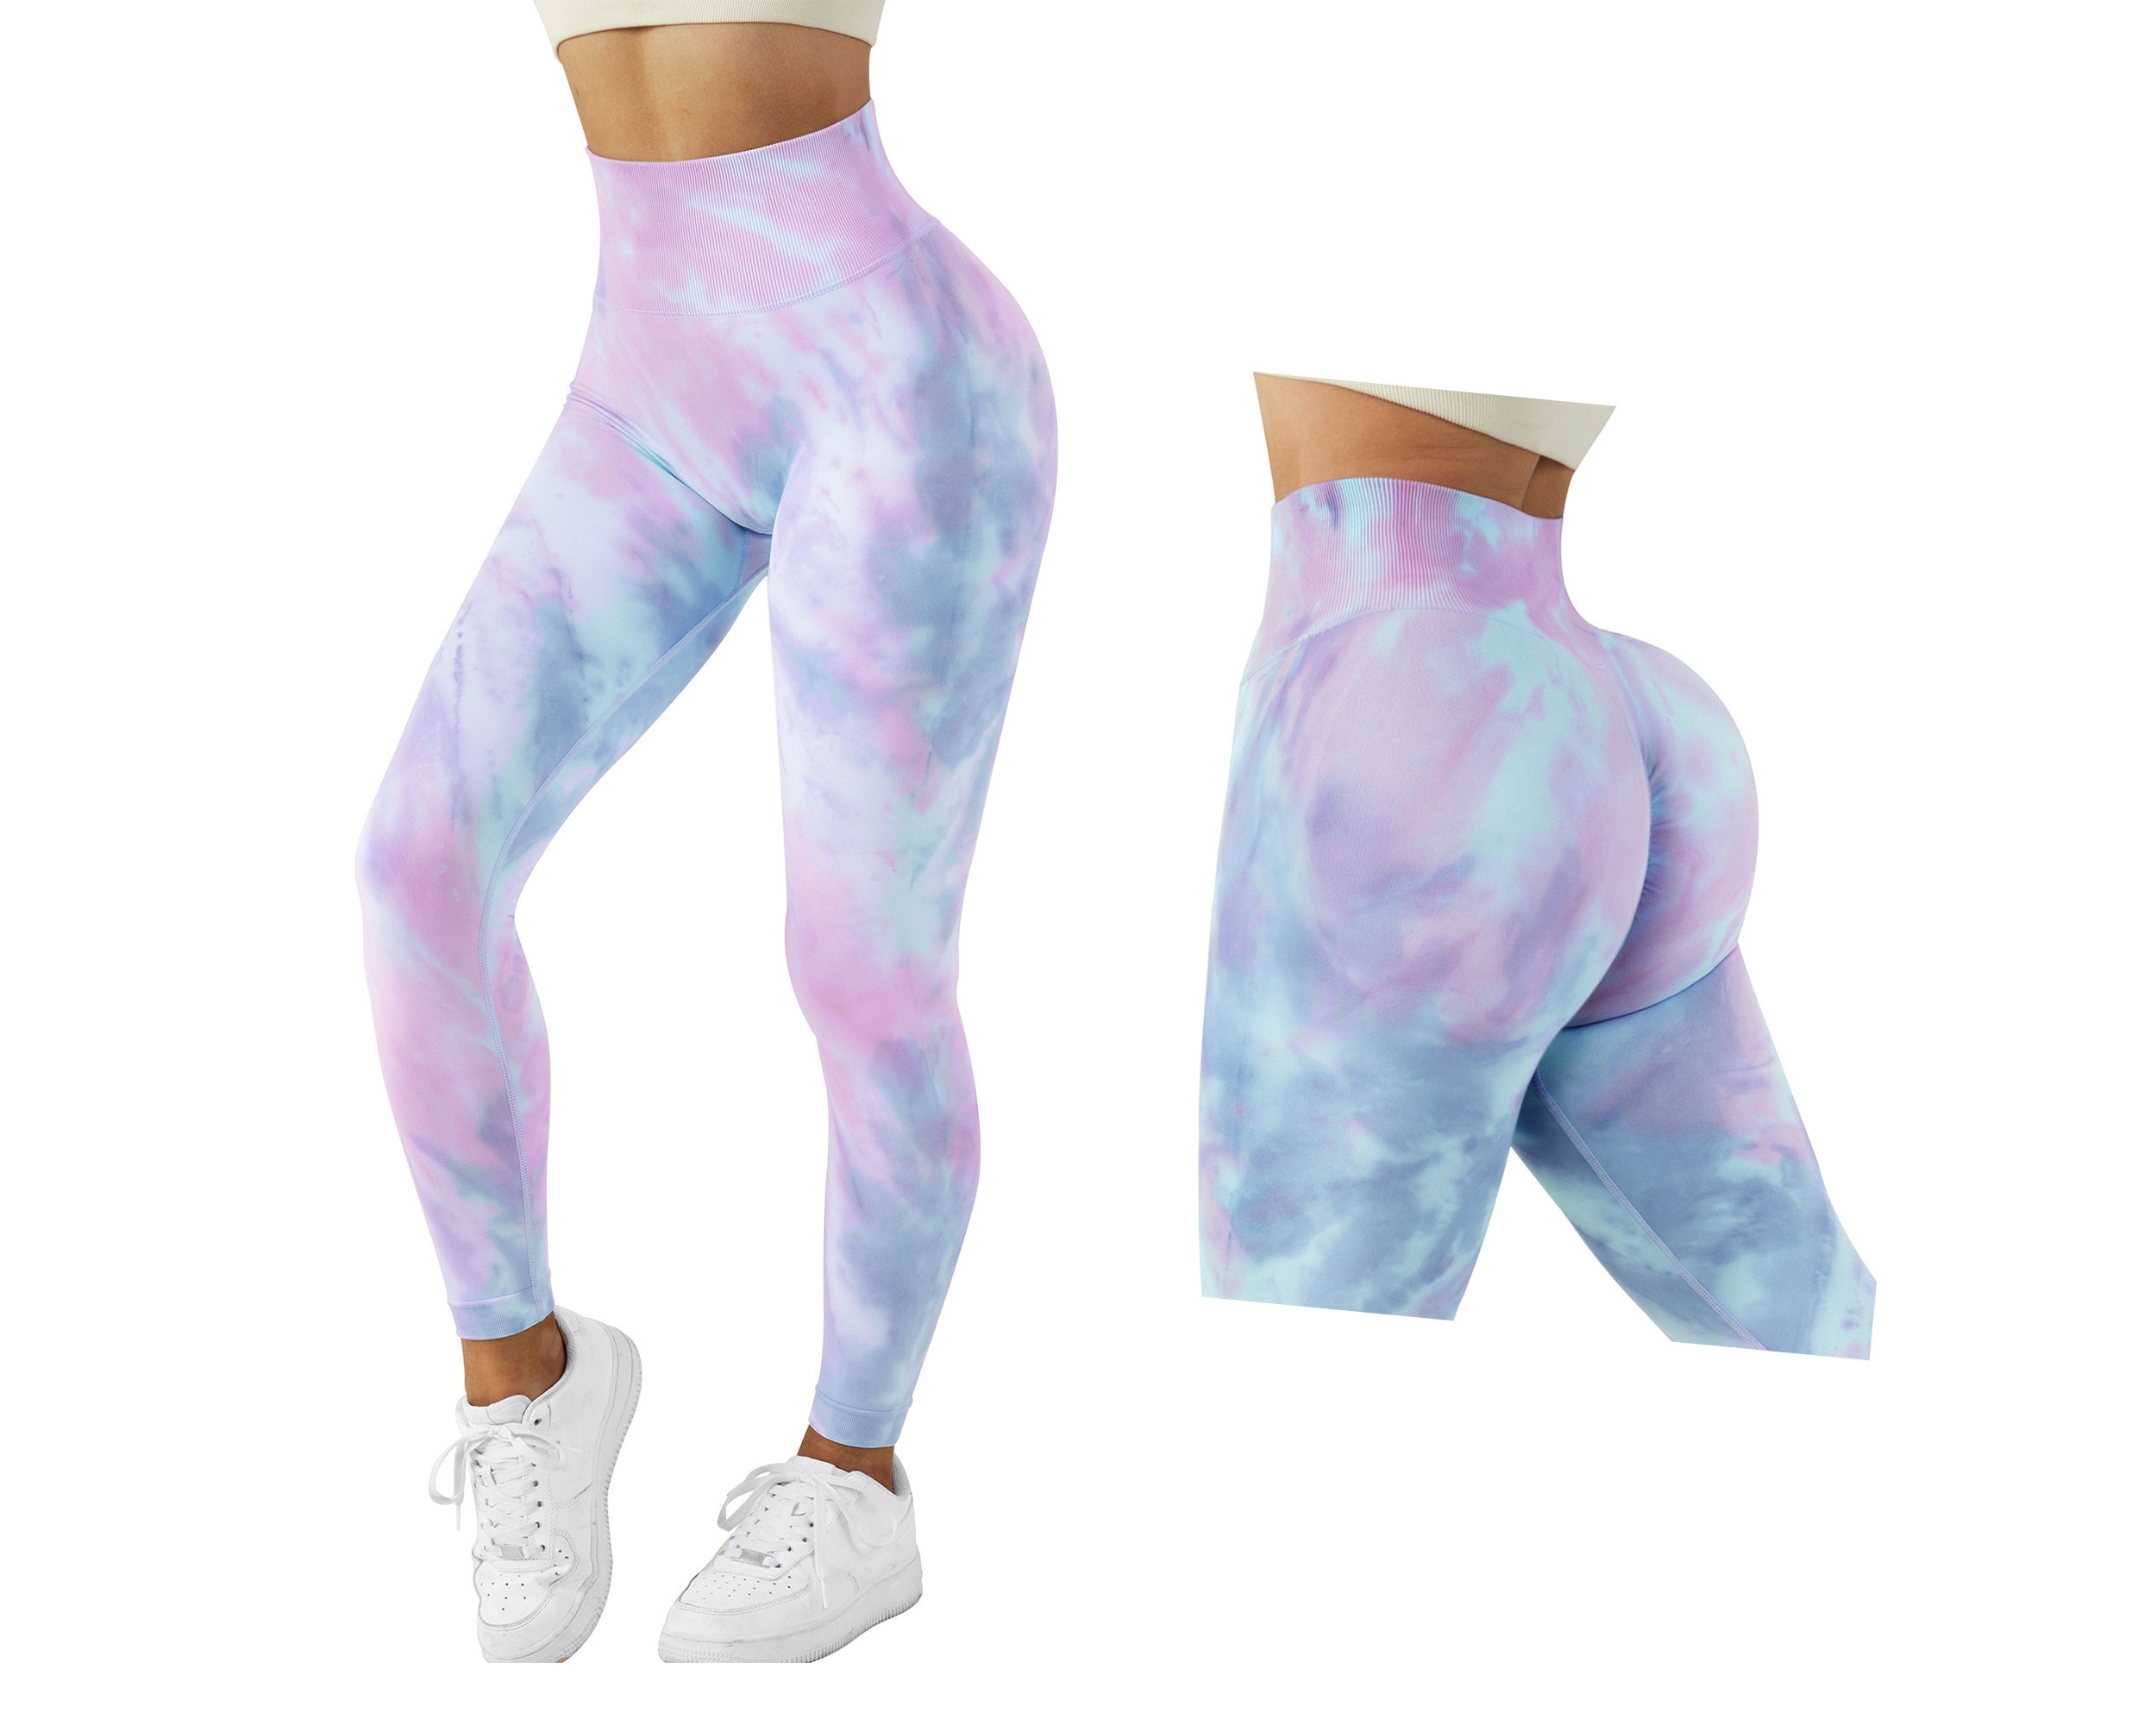 V Cut High Waisted Yoga Pants for Women Butt Lift Ruched Scrunch Butt  Leggings Workout Booty Tights 